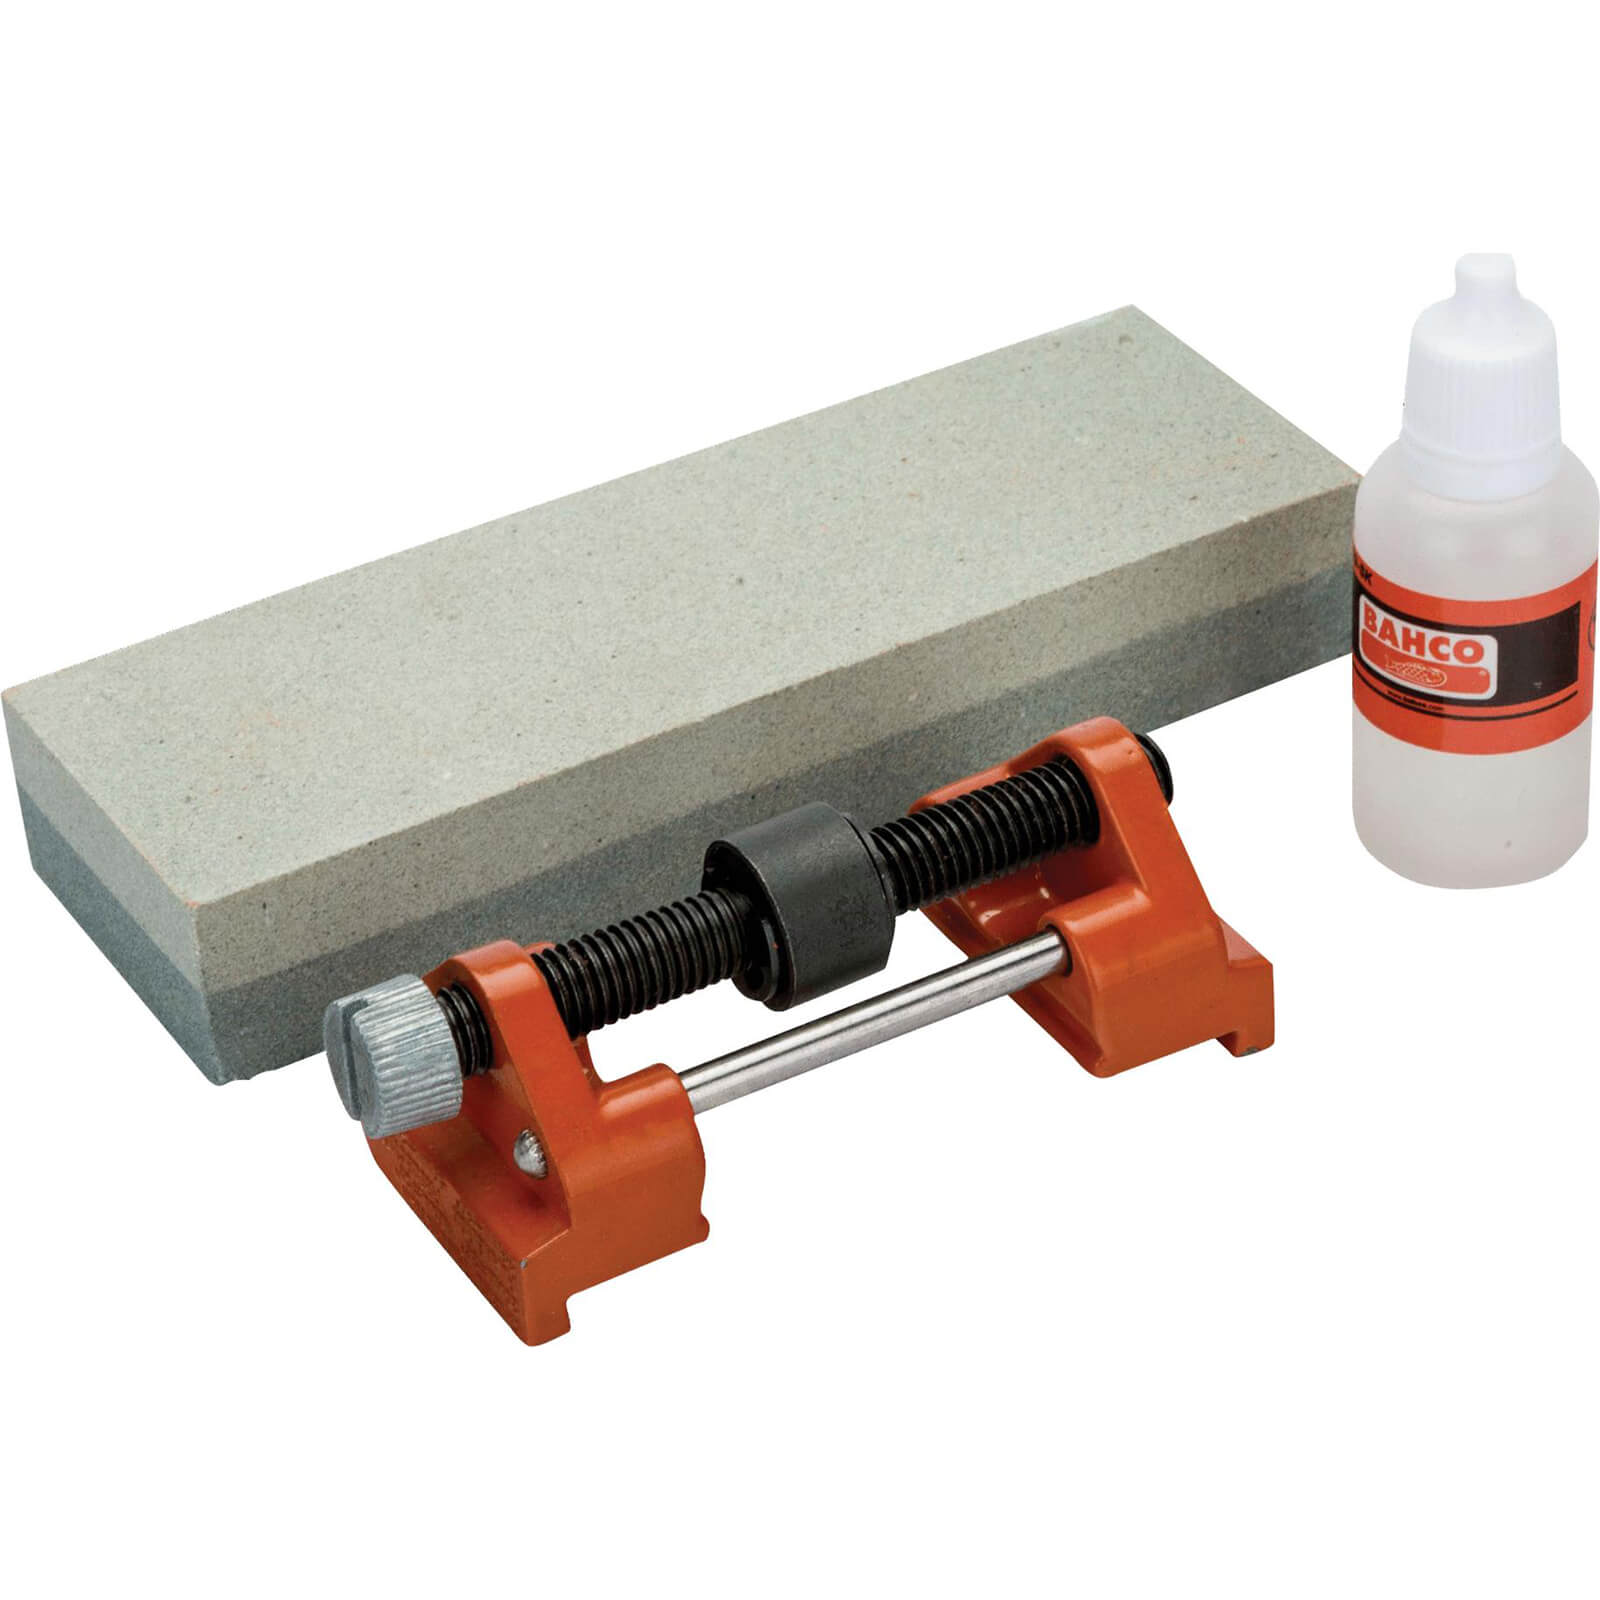 Photo of Bahco 529sk Sharpening Kit For Wood Chisels